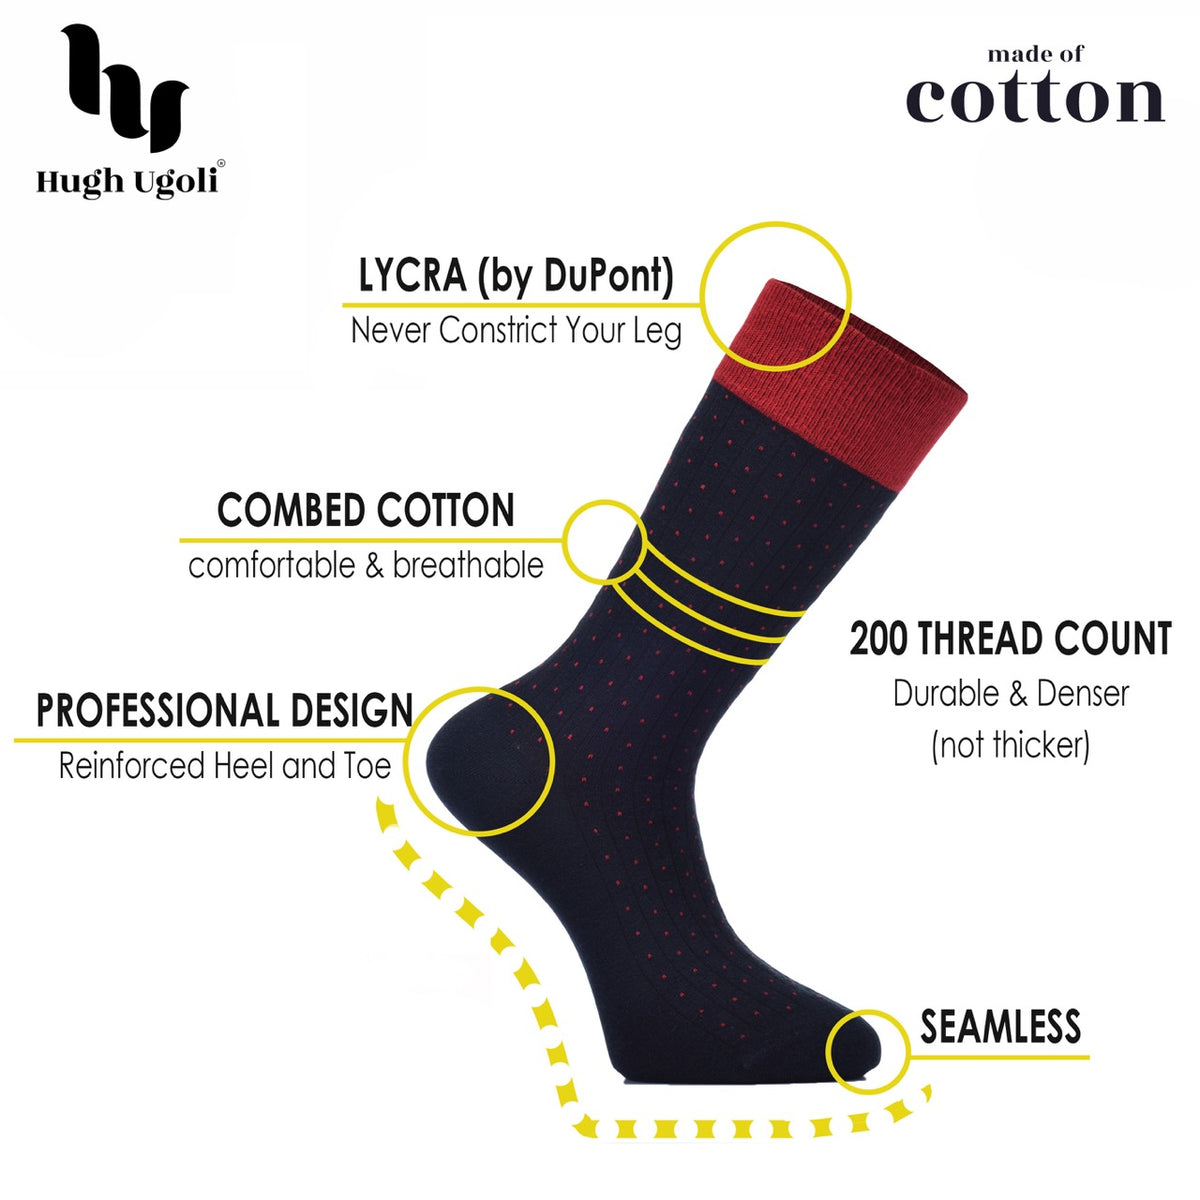 Fancy Cotton Dress Crew Socks For Mens With Gift Box, 6 Pairs